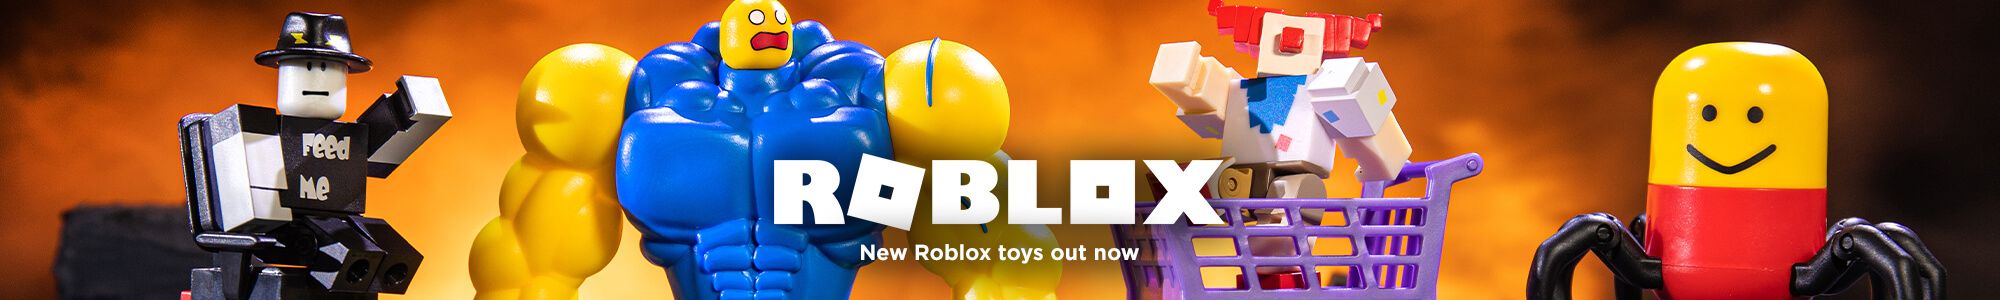 Roblox Roblox Toys Figures The Entertainer - tower of dread codes roblox